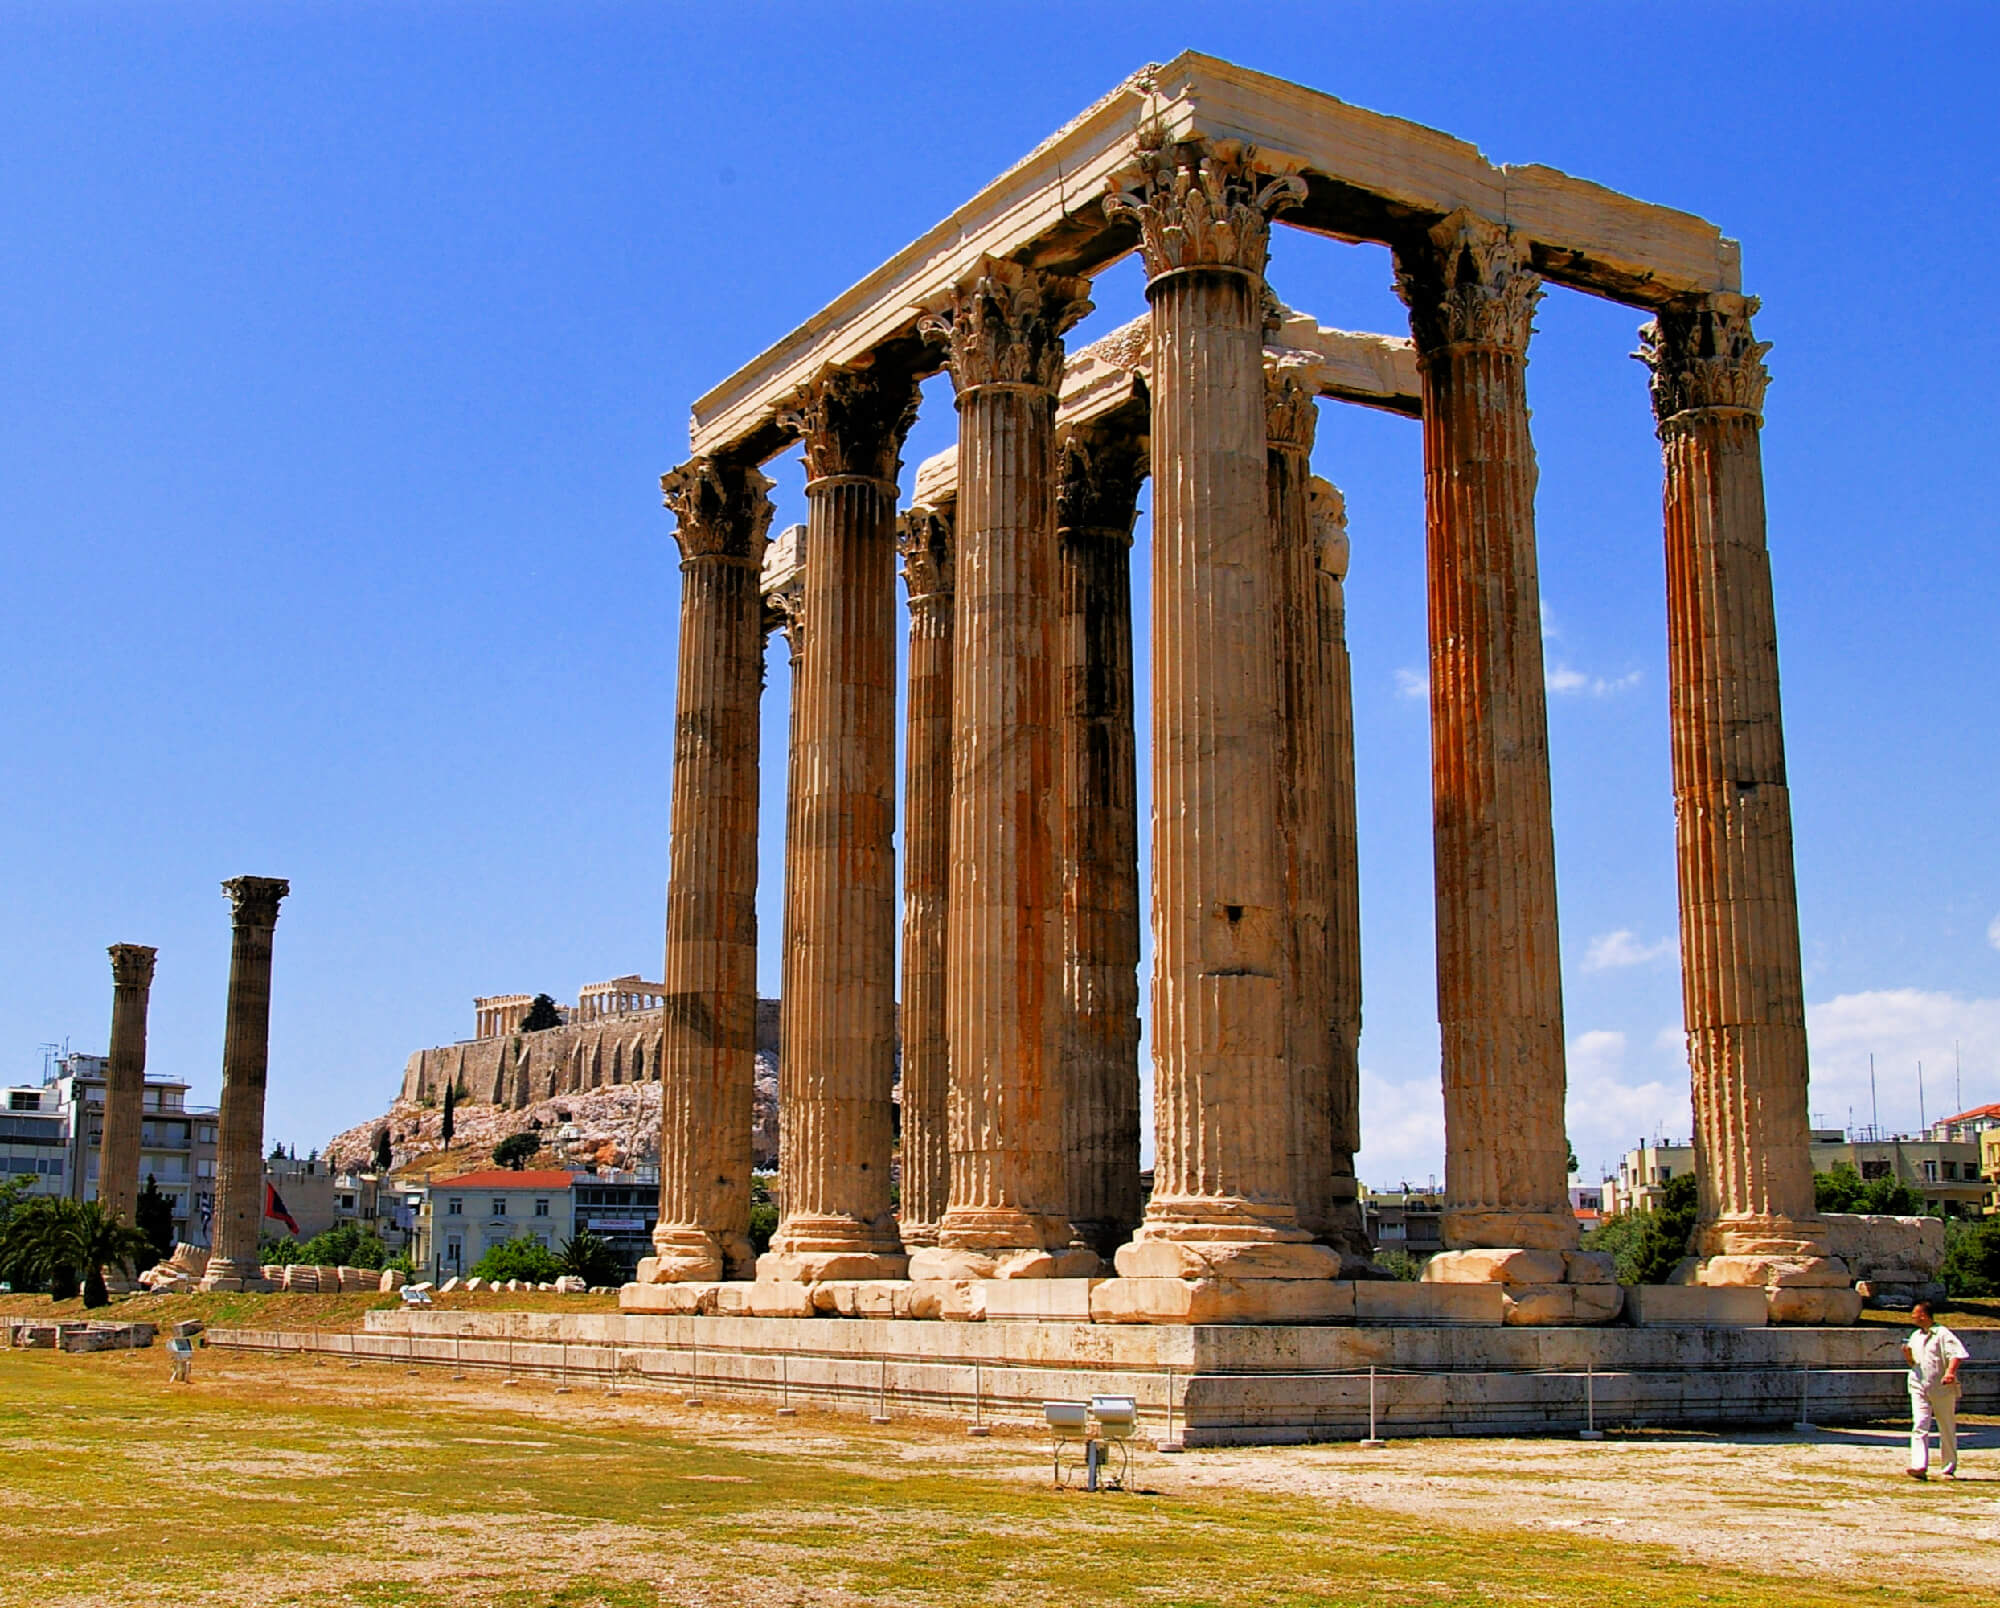 The Temple Of Olympian Zeus is worthy of your 3-day Athens itinerary.